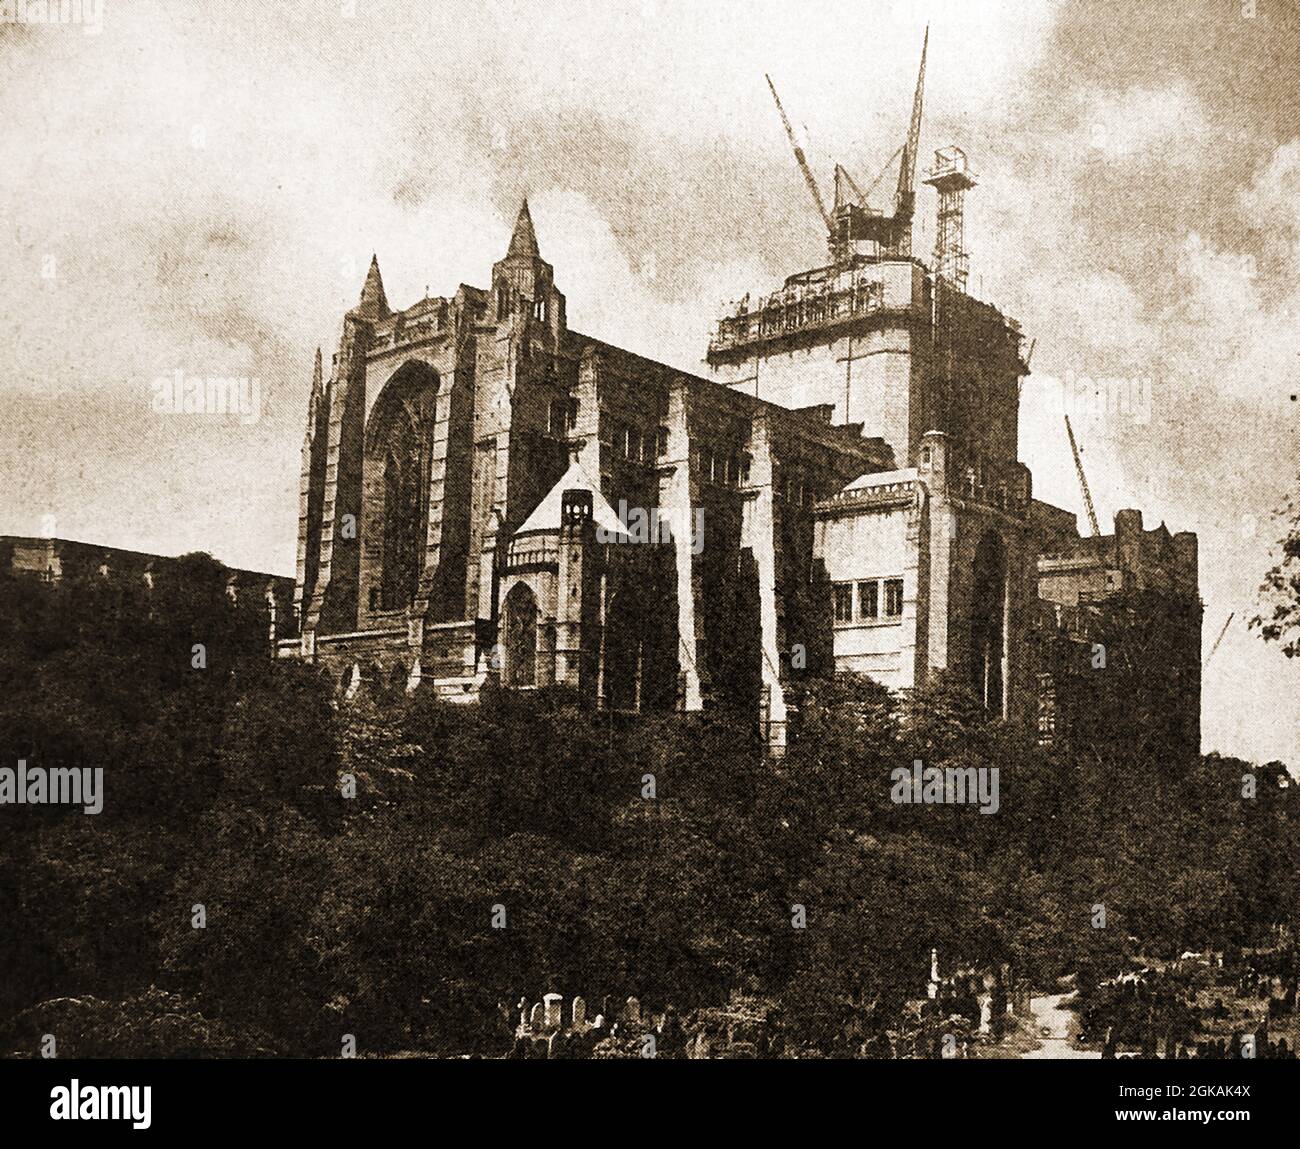 1939 - Liverpool  (UK) Cathedral on St James' Mount under construction. The Anglican cathedral which  is the seat of the Bishop of Liverpool was based on a design by Giles Gilbert Scott.  Constructed began in 1904. Its completion in October 1978   was marked by a service of thanksgiving and dedication in October 1978.The bell tower is the largest, and also one of the tallest, in the world Stock Photo